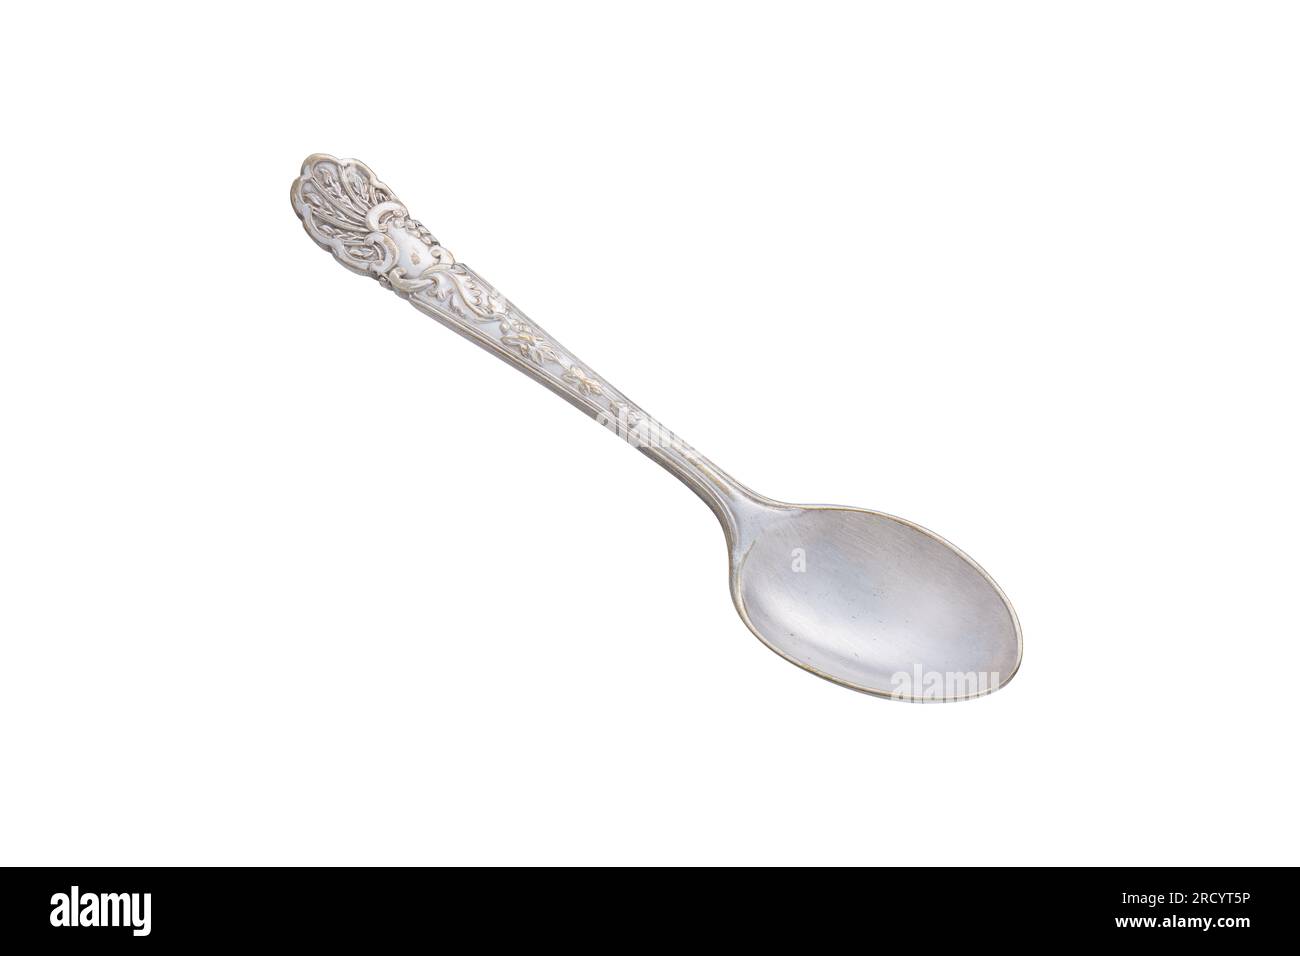 Metal dessert spoon, cut out, photo stacking Stock Photo